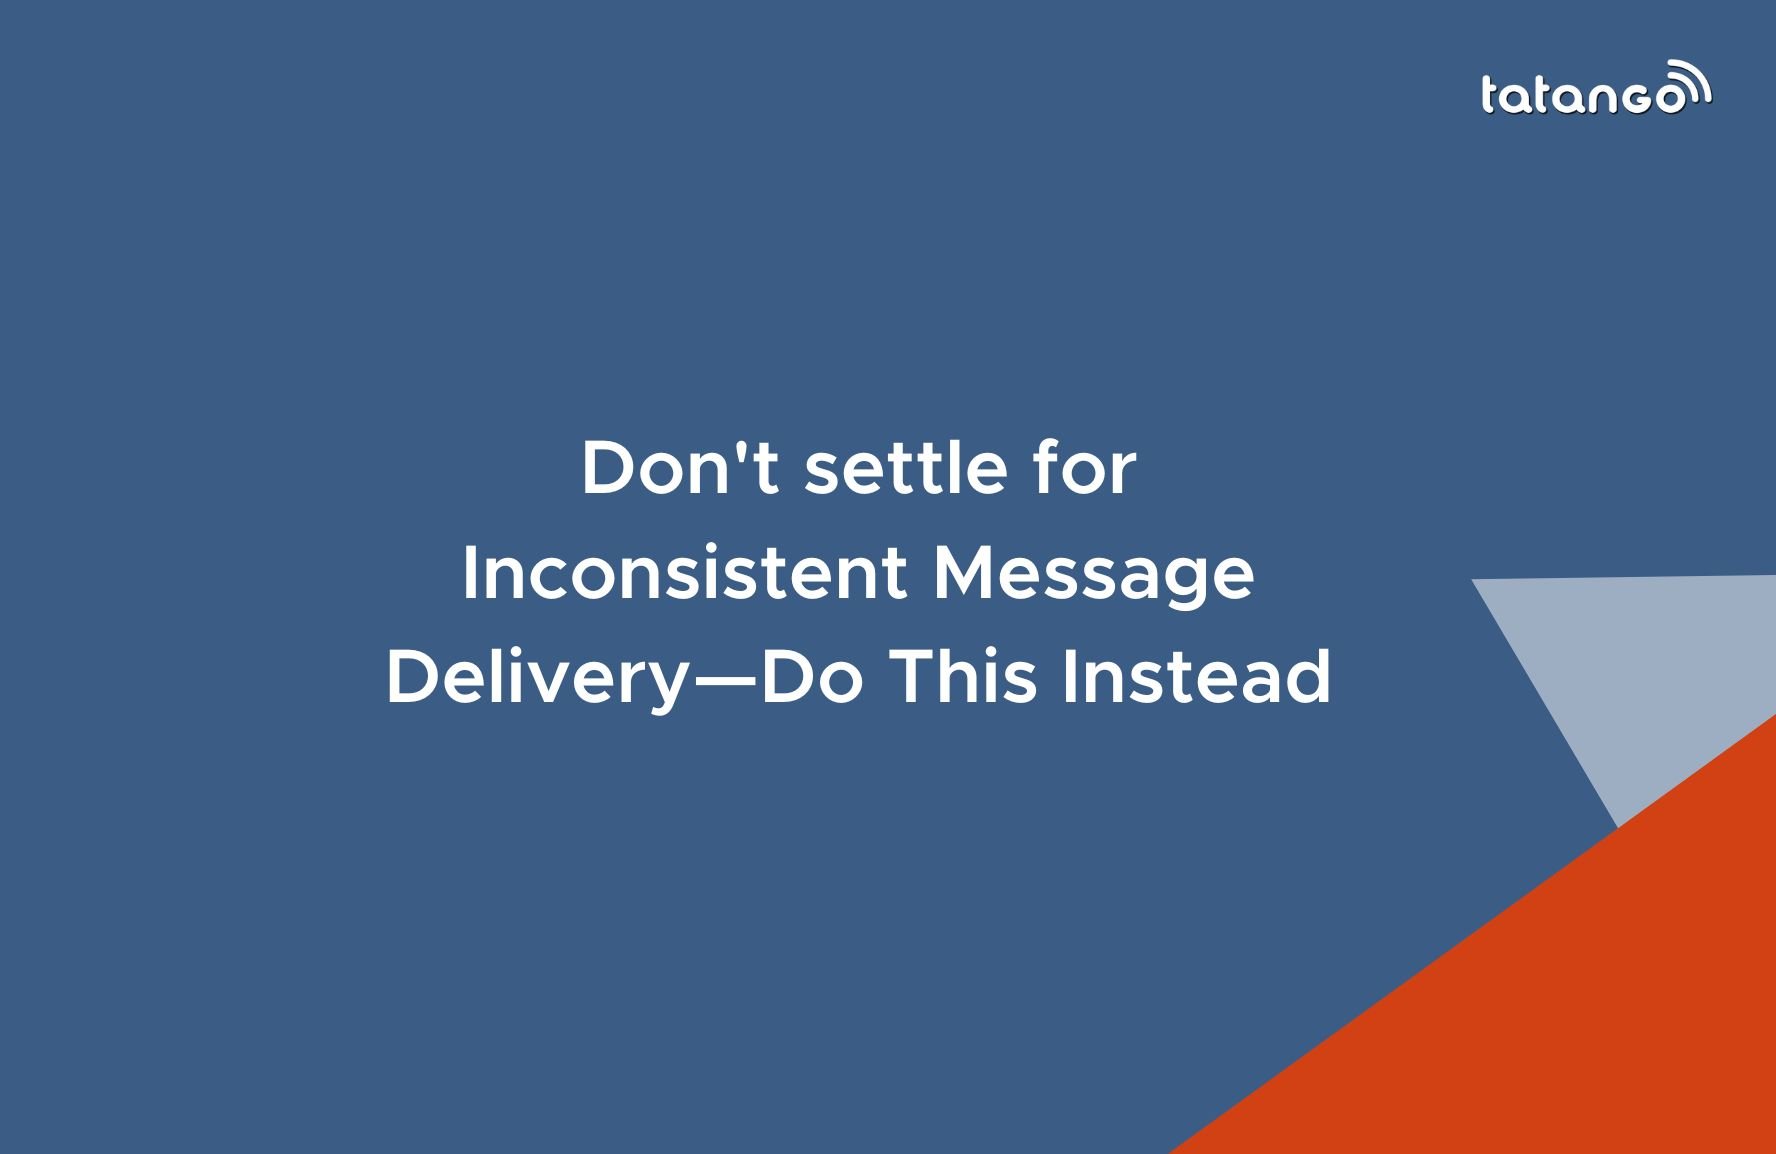 Don't settle for Inconsistent Message Delivery—Do This Instead